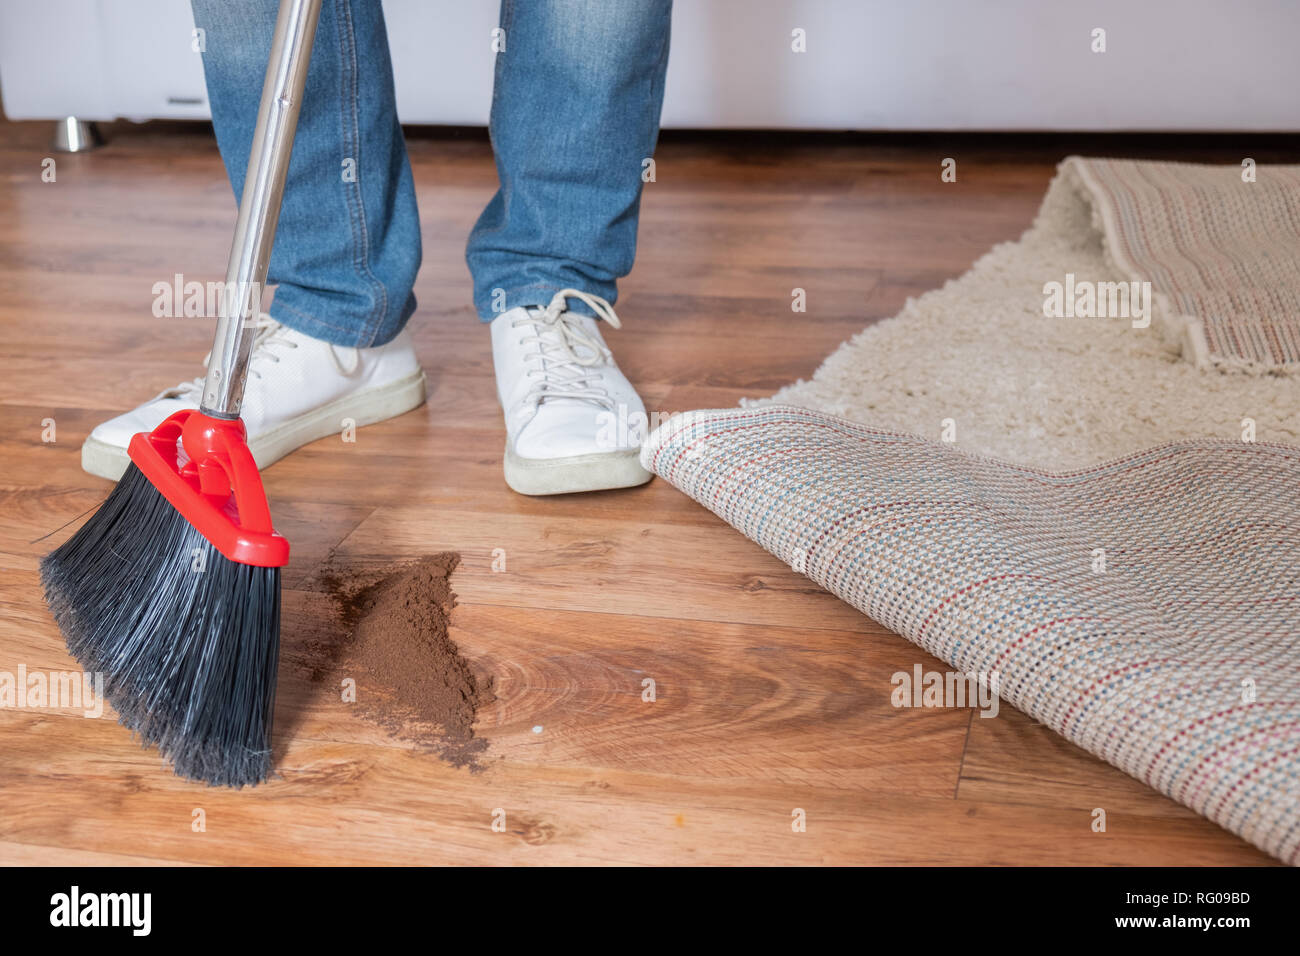 Housekeeping concept close up of broom sweeping floor at home Stock Photo